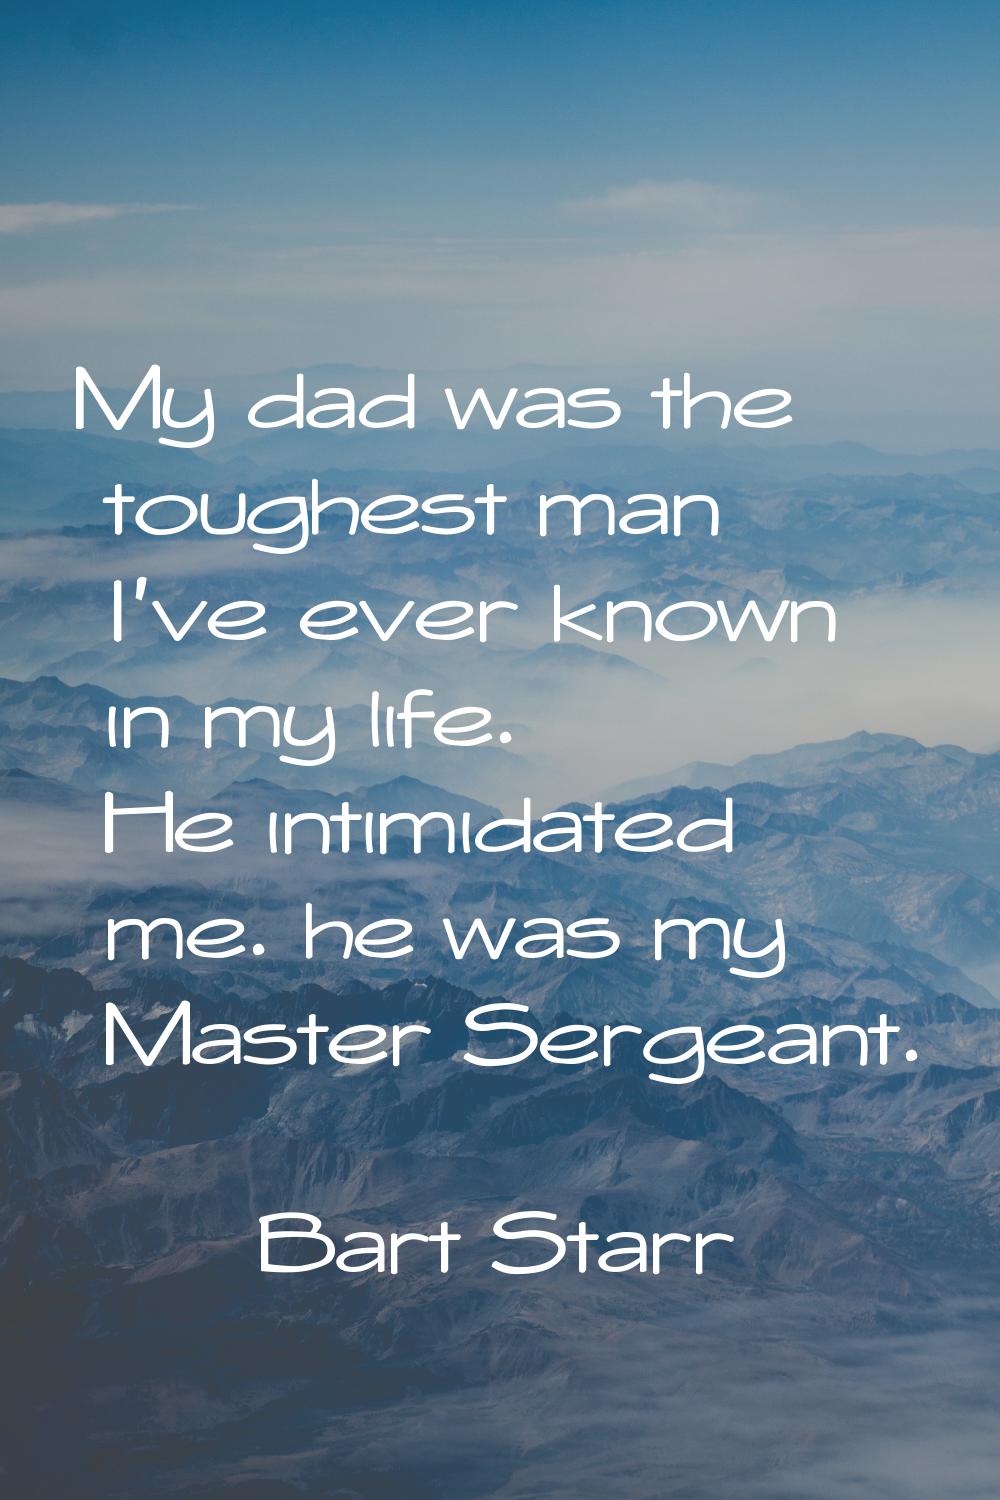 My dad was the toughest man I've ever known in my life. He intimidated me. he was my Master Sergean